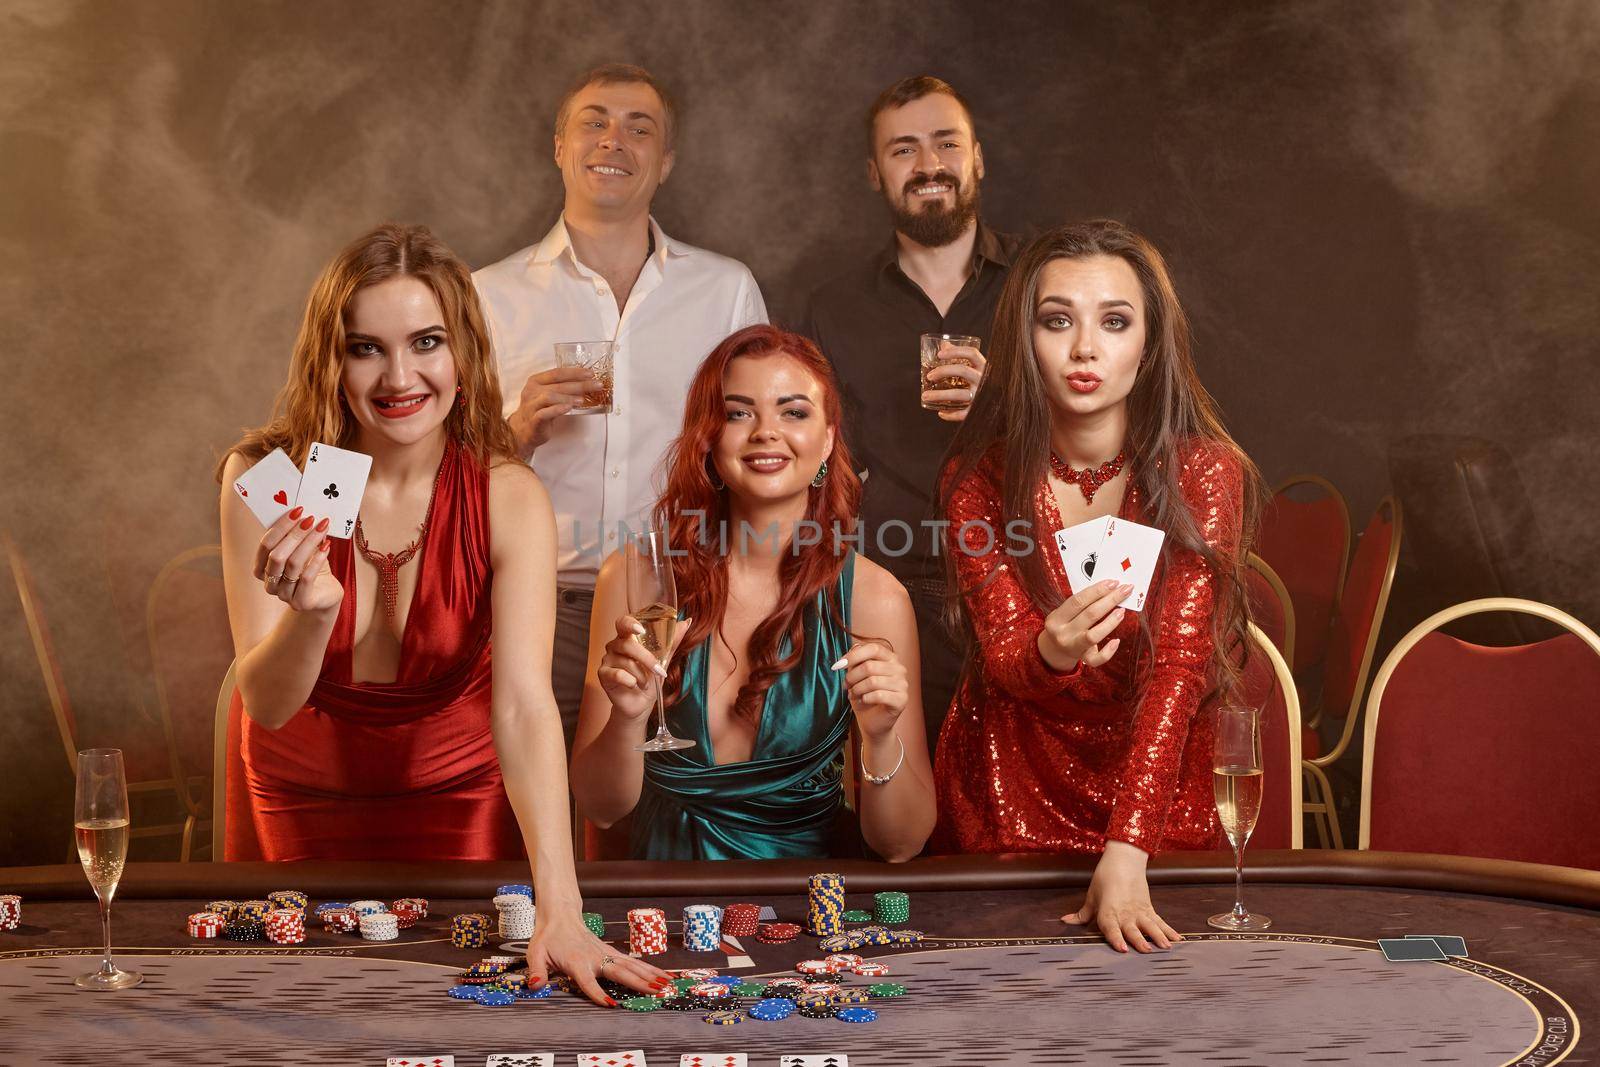 Group of a pleasant classmates are playing poker at casino. They are celebrating their win, looking at the camera and holding some playing cards in their hands while posing at the table against a smoke background. Chips, money, alcohol, gambling, entertainment concept.